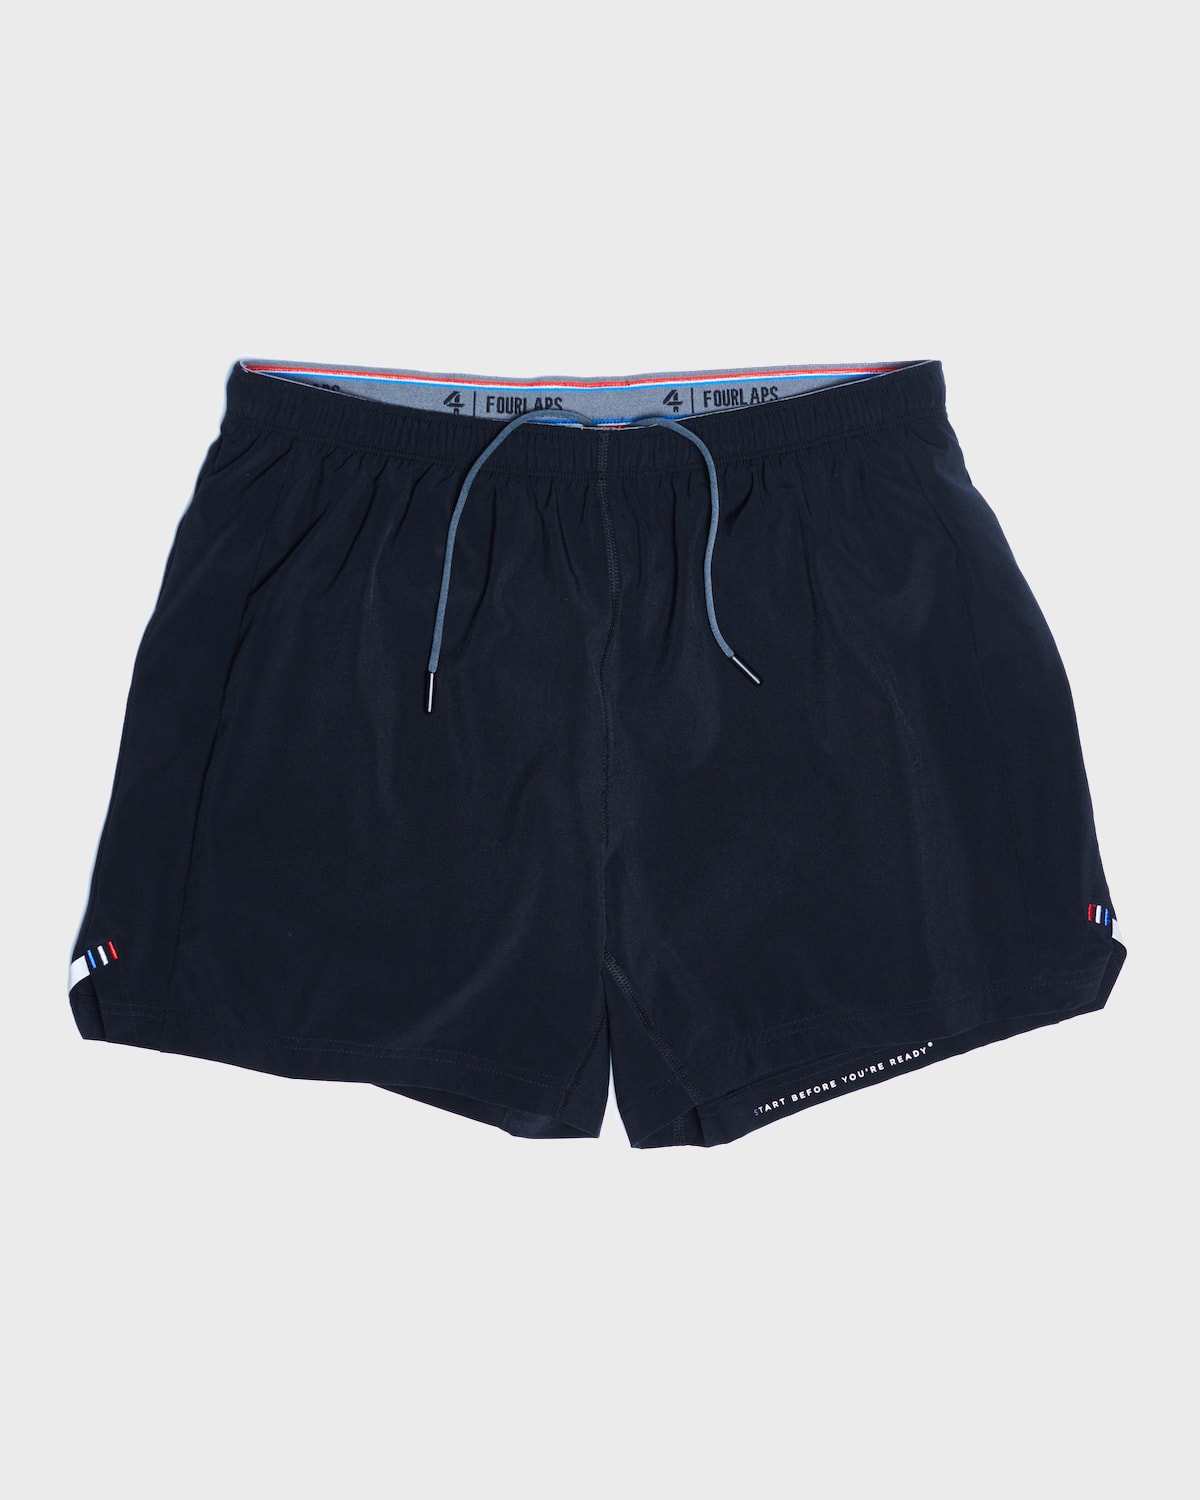 Fourlaps Men's Extend Two-Tone Track Shorts